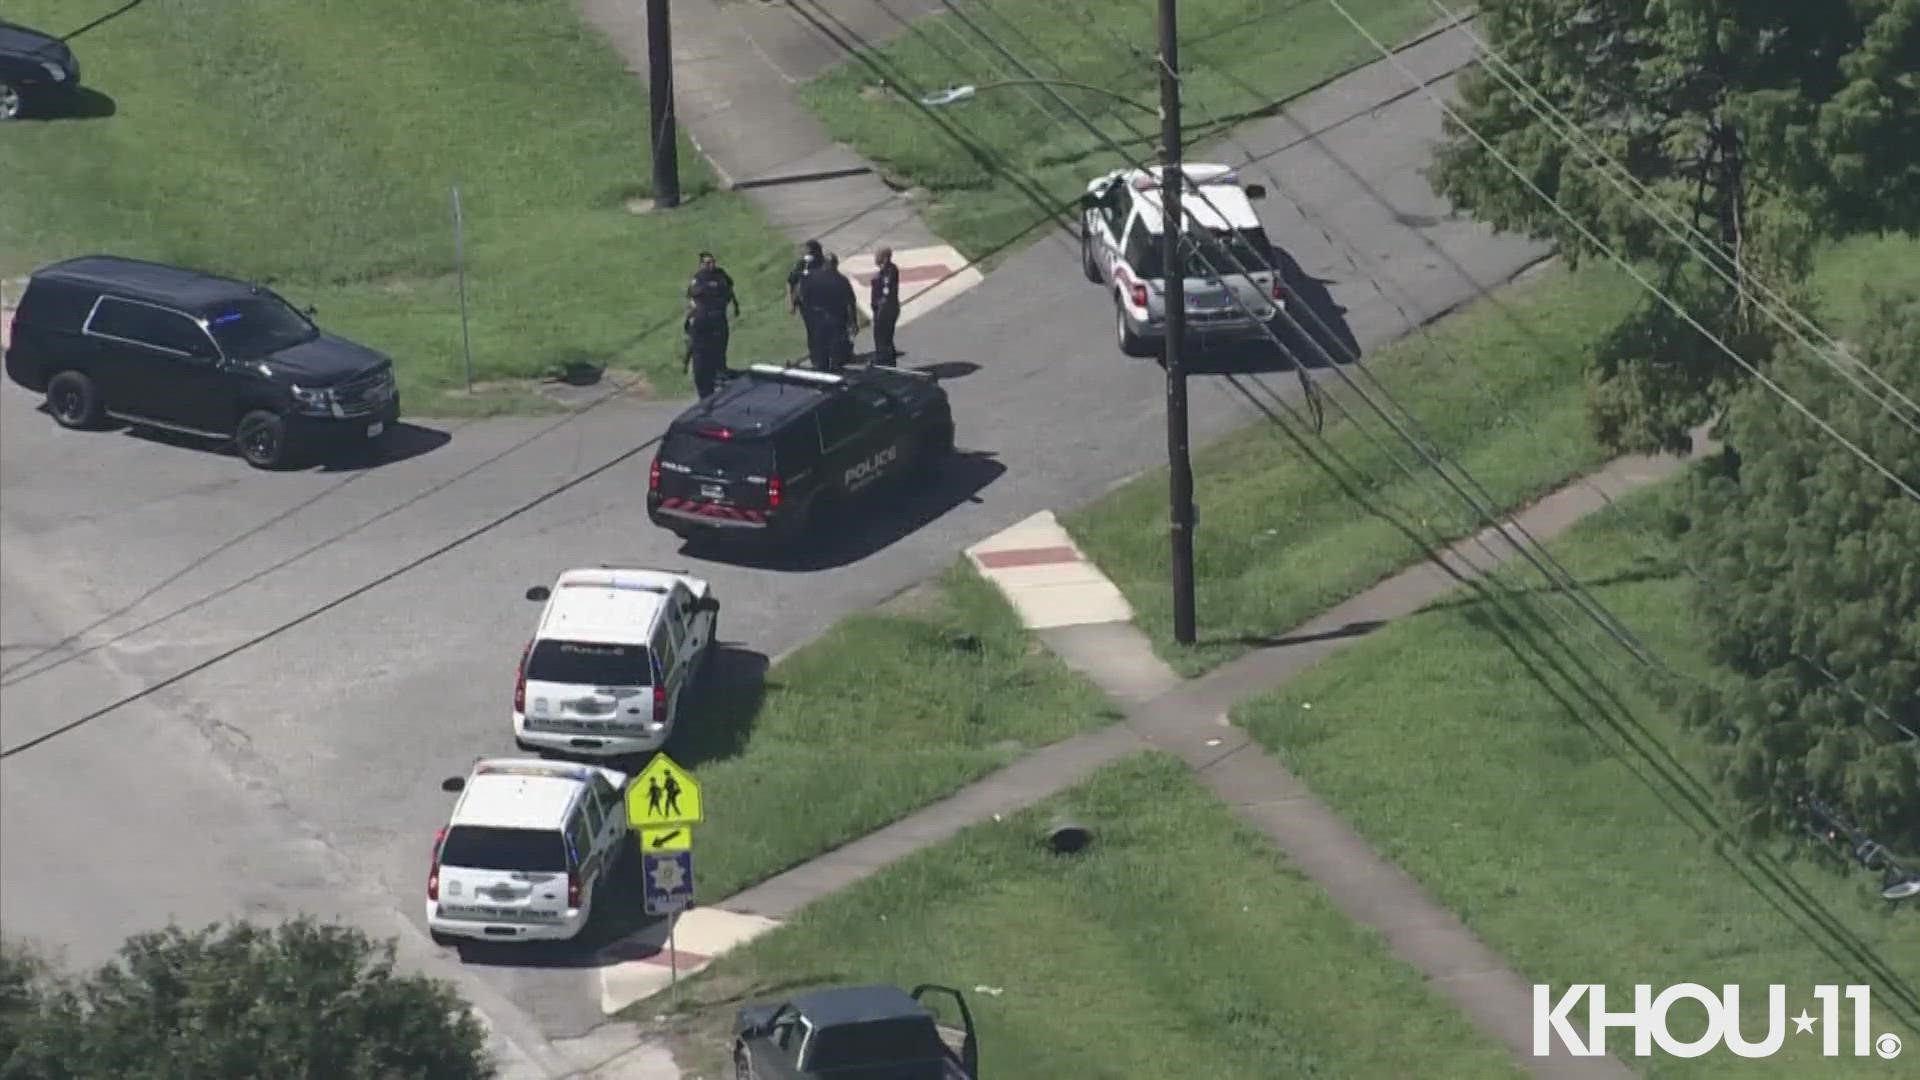 Police said a teen, who isn’t believed to be a student, was shot multiple times and transported to a nearby hospital.